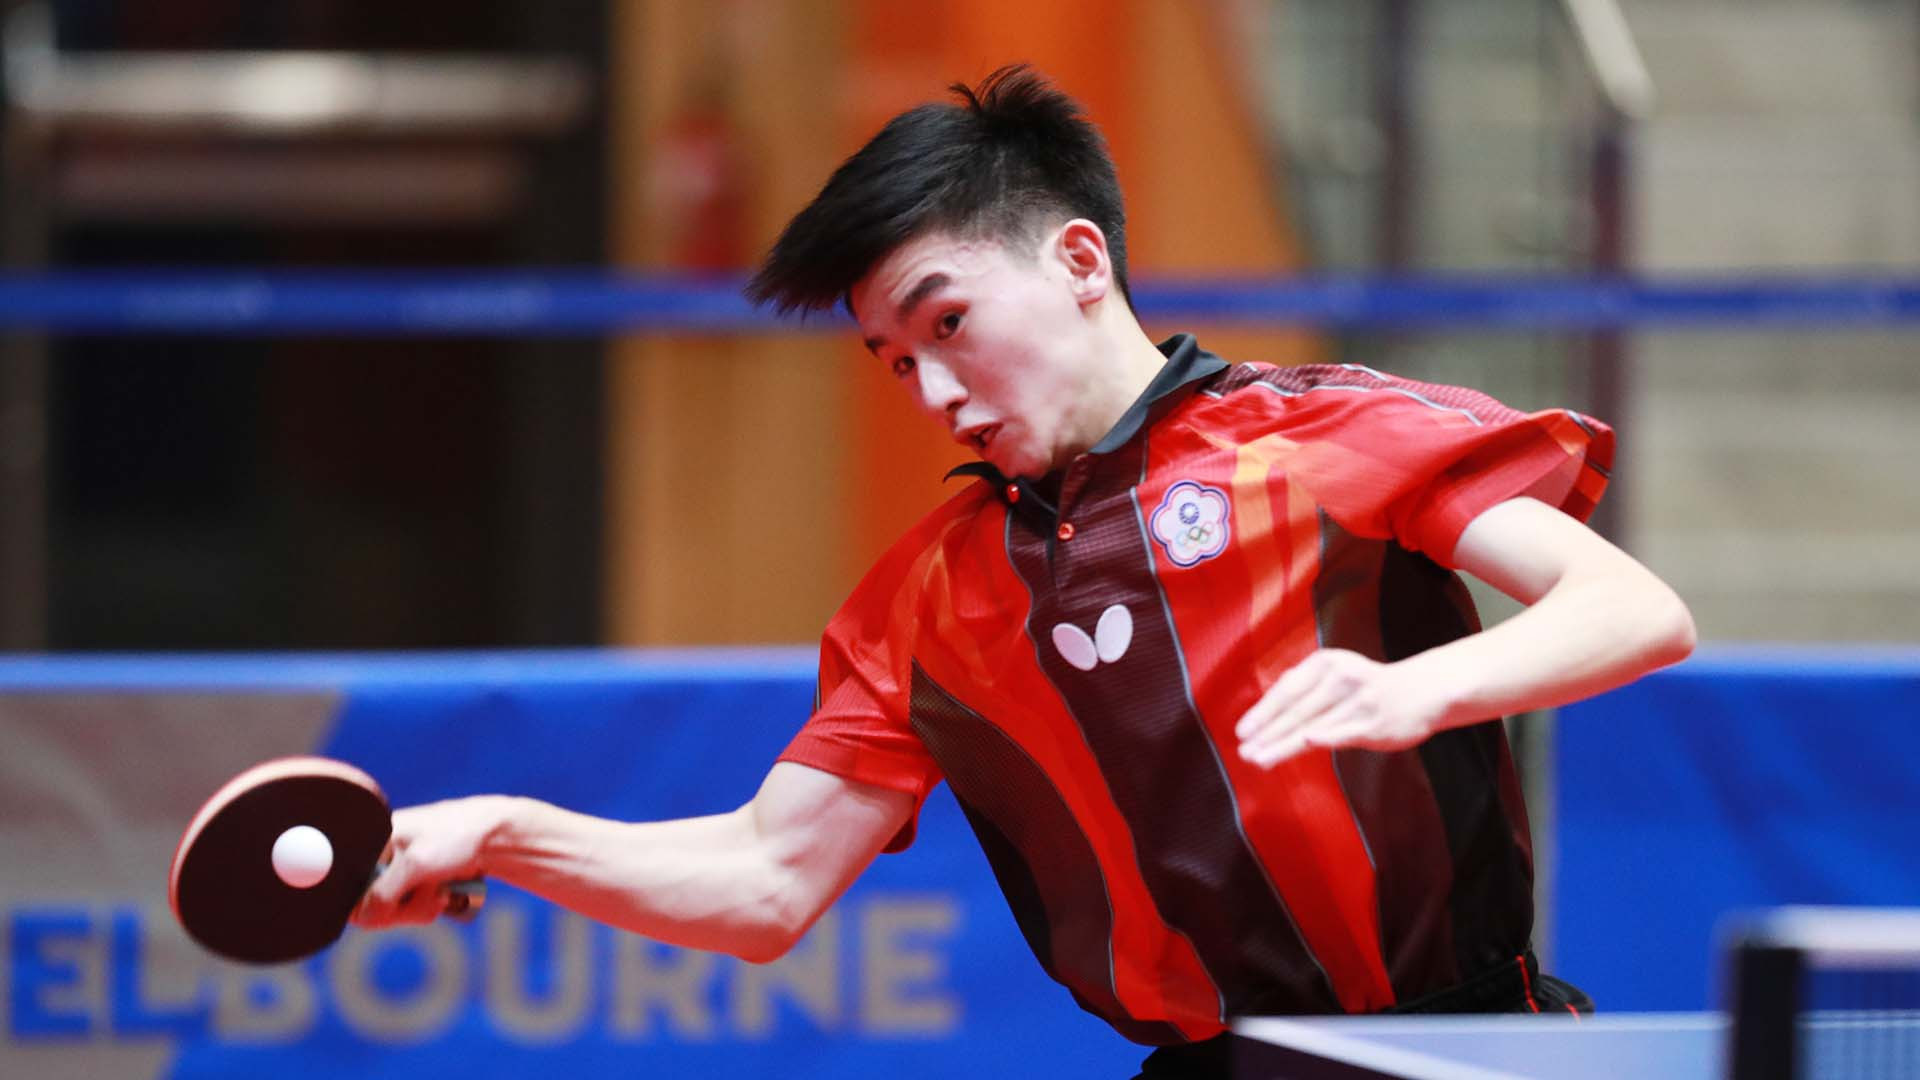 Top four teams advance to boys' team semi-finals at ITTF World Junior Table Tennis Championships